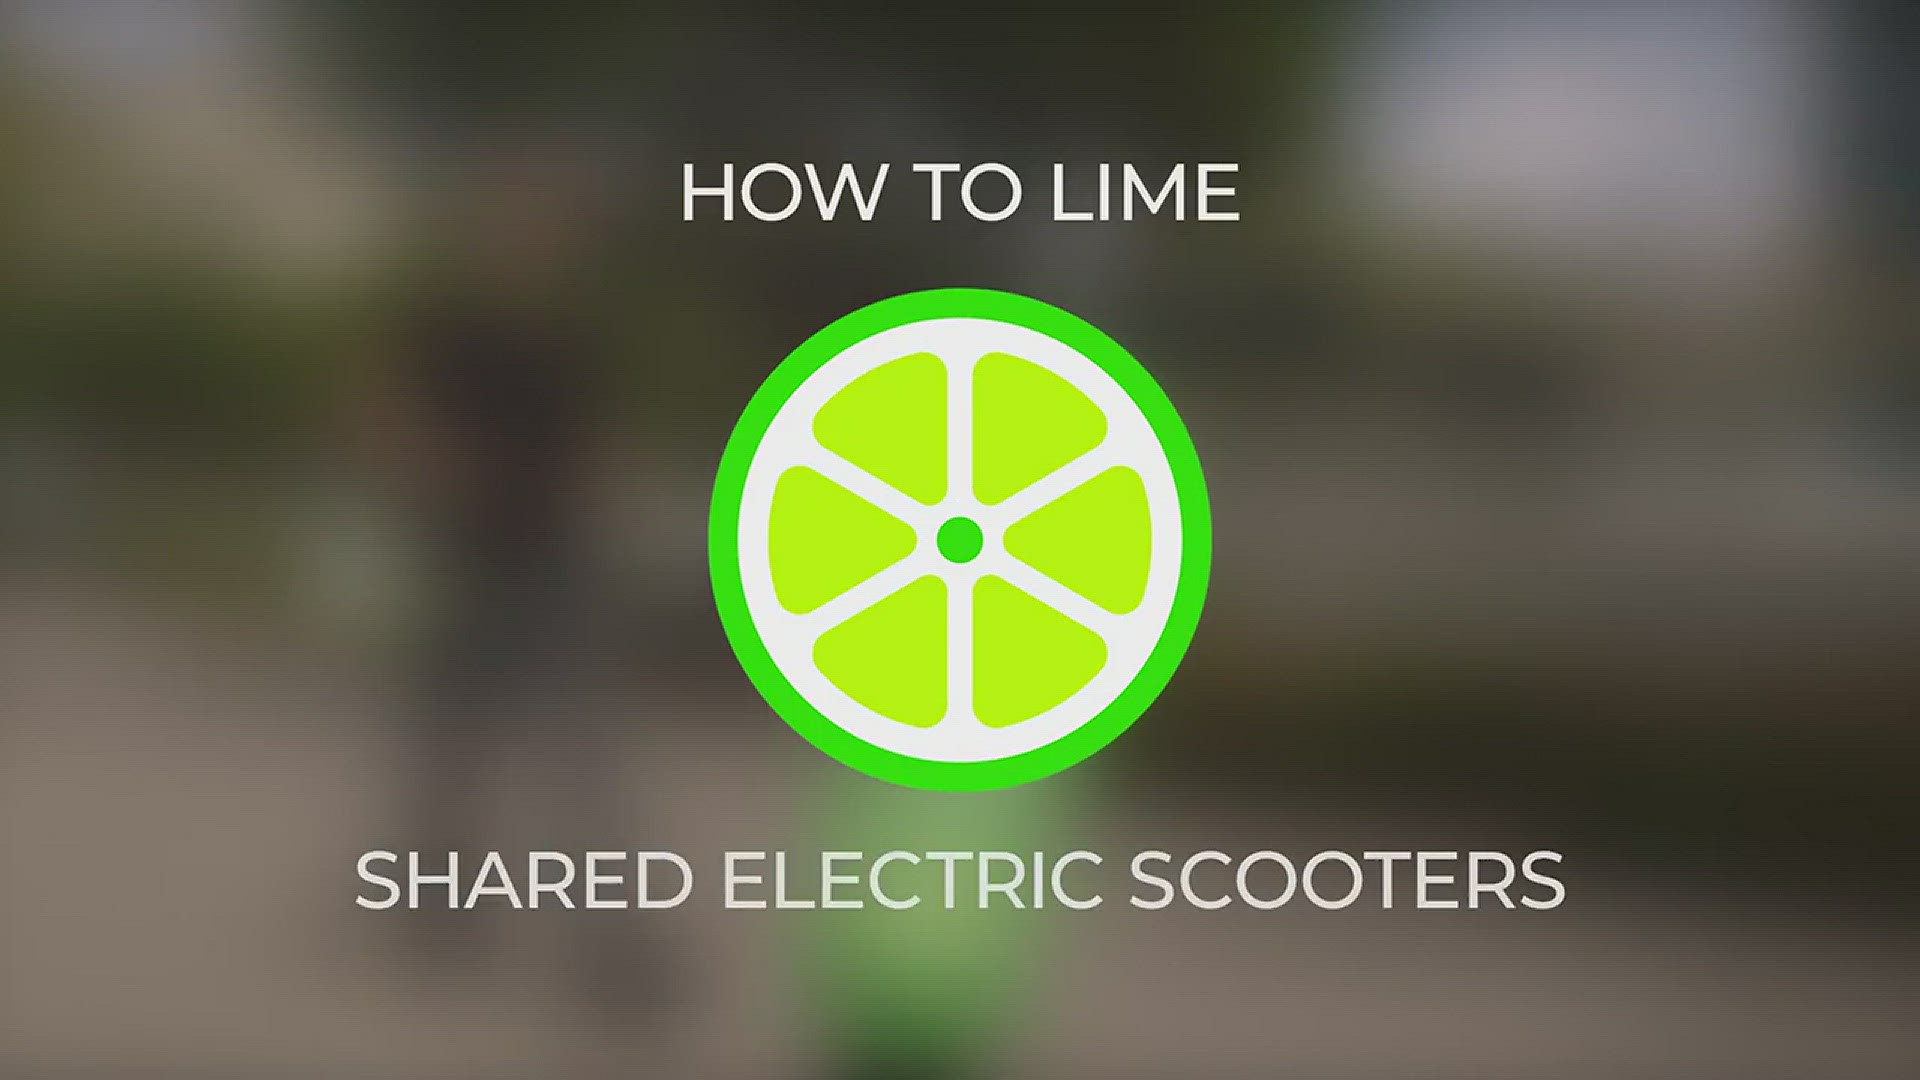 Lime is offering communities an affordable alternative transportation solution.